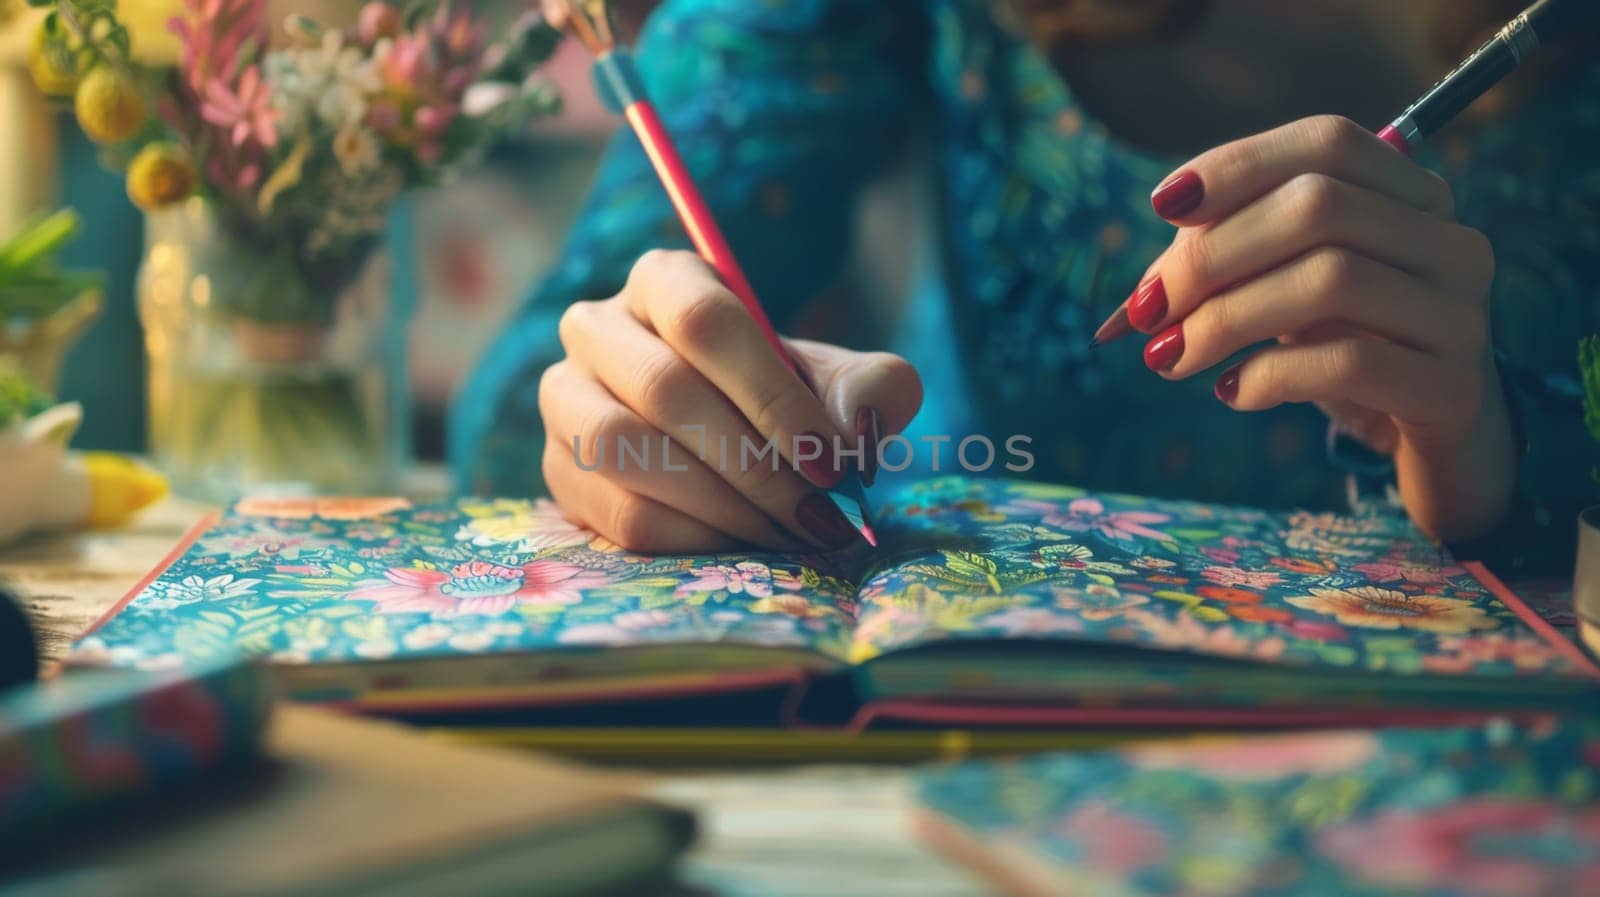 A woman holding a pencil and writing on an open book